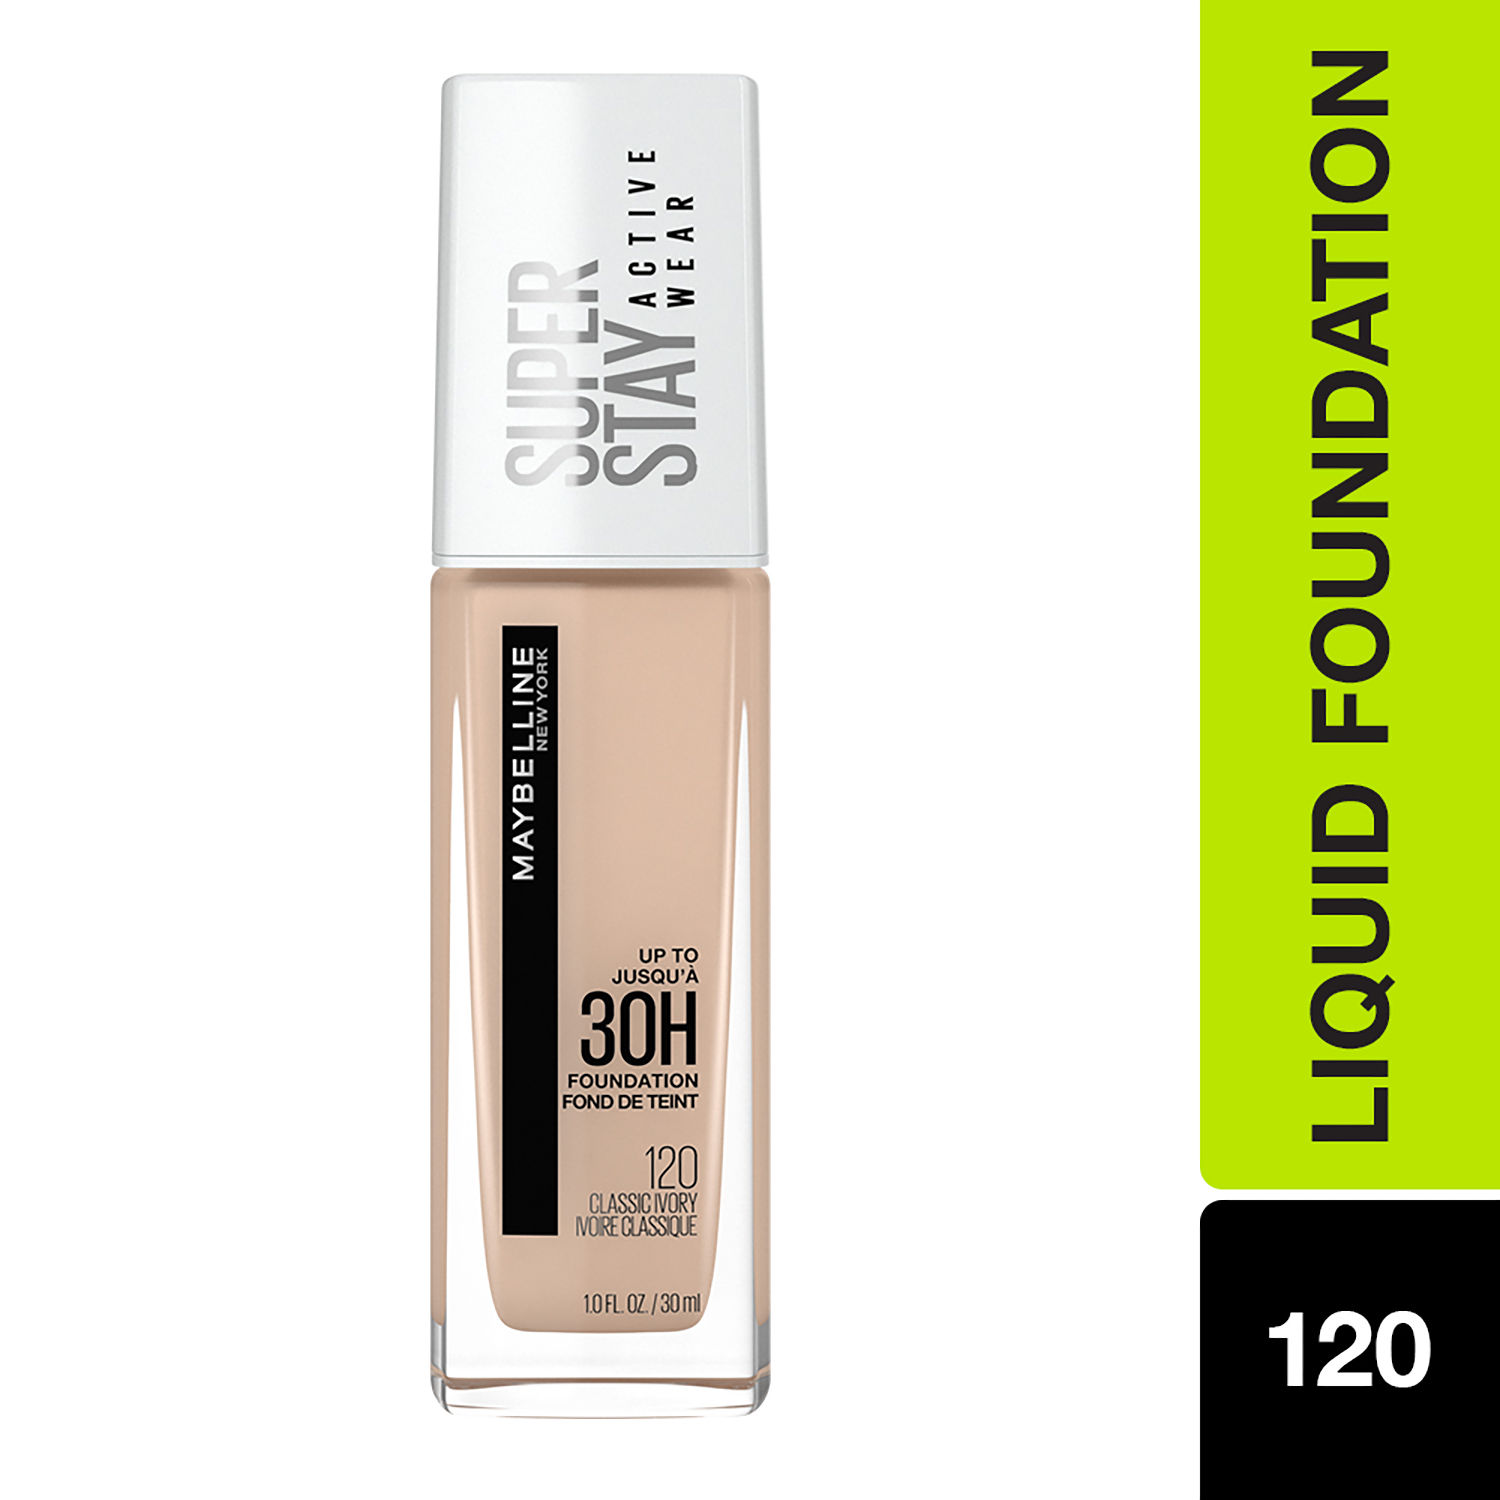 Matte Coverage Wear, HR Ivory, Classic Proof, 30ml Wear 120, Super New Full Stay Foundation, Liquid with York Active Maybelline 30 Finish Transfer